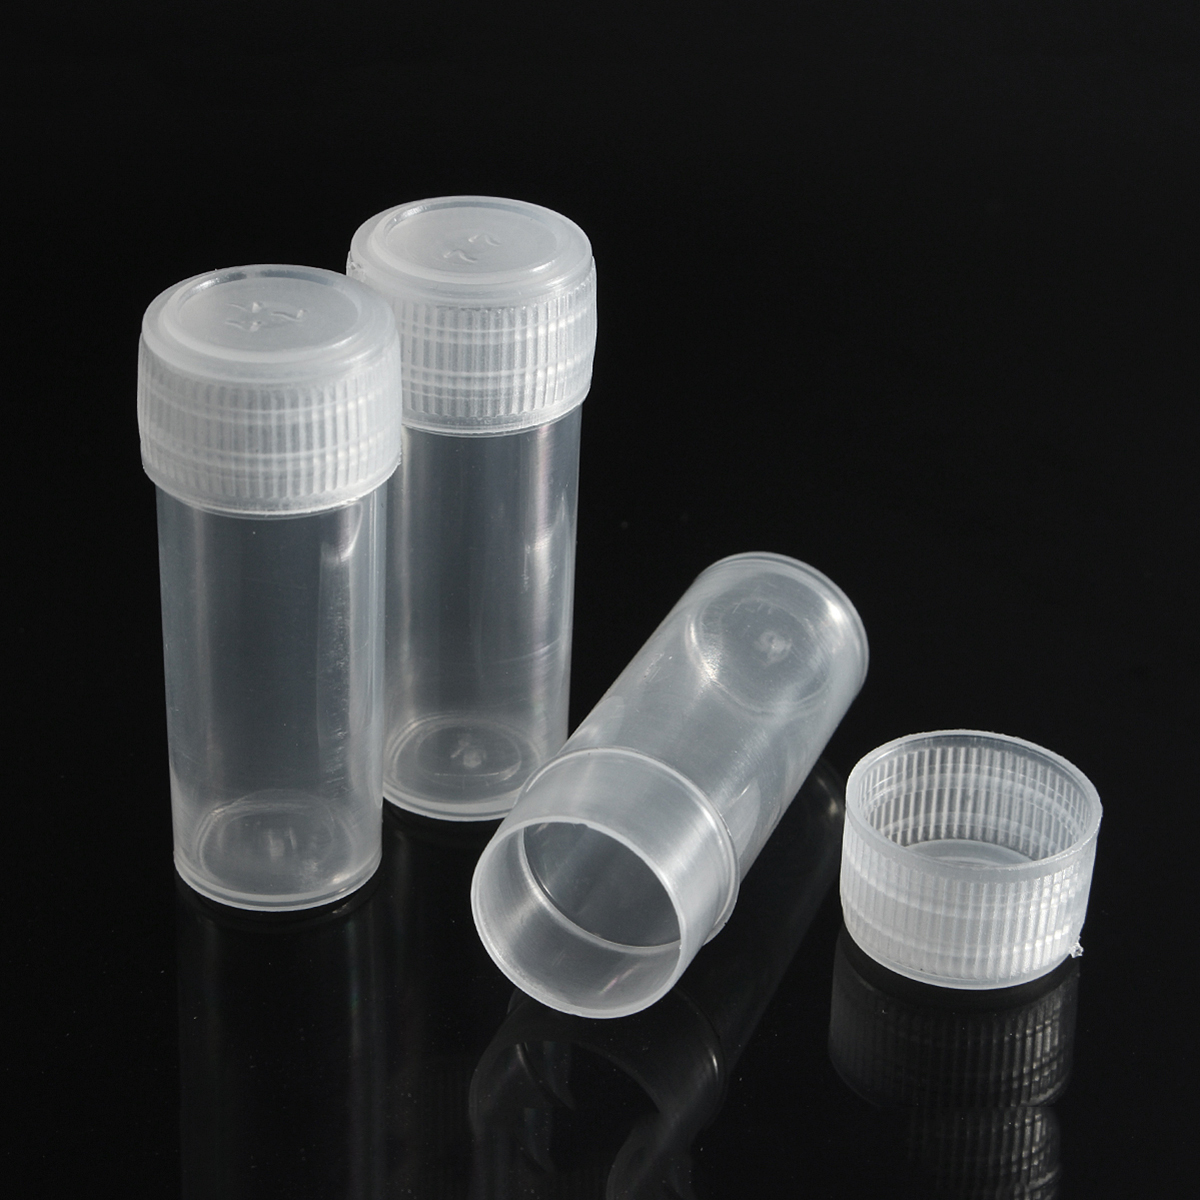 20Pcs-5ml-Chemistry-Plastic-Test-Tube-Vials-with-Seal-Caps-Pack-Container-1300038-3